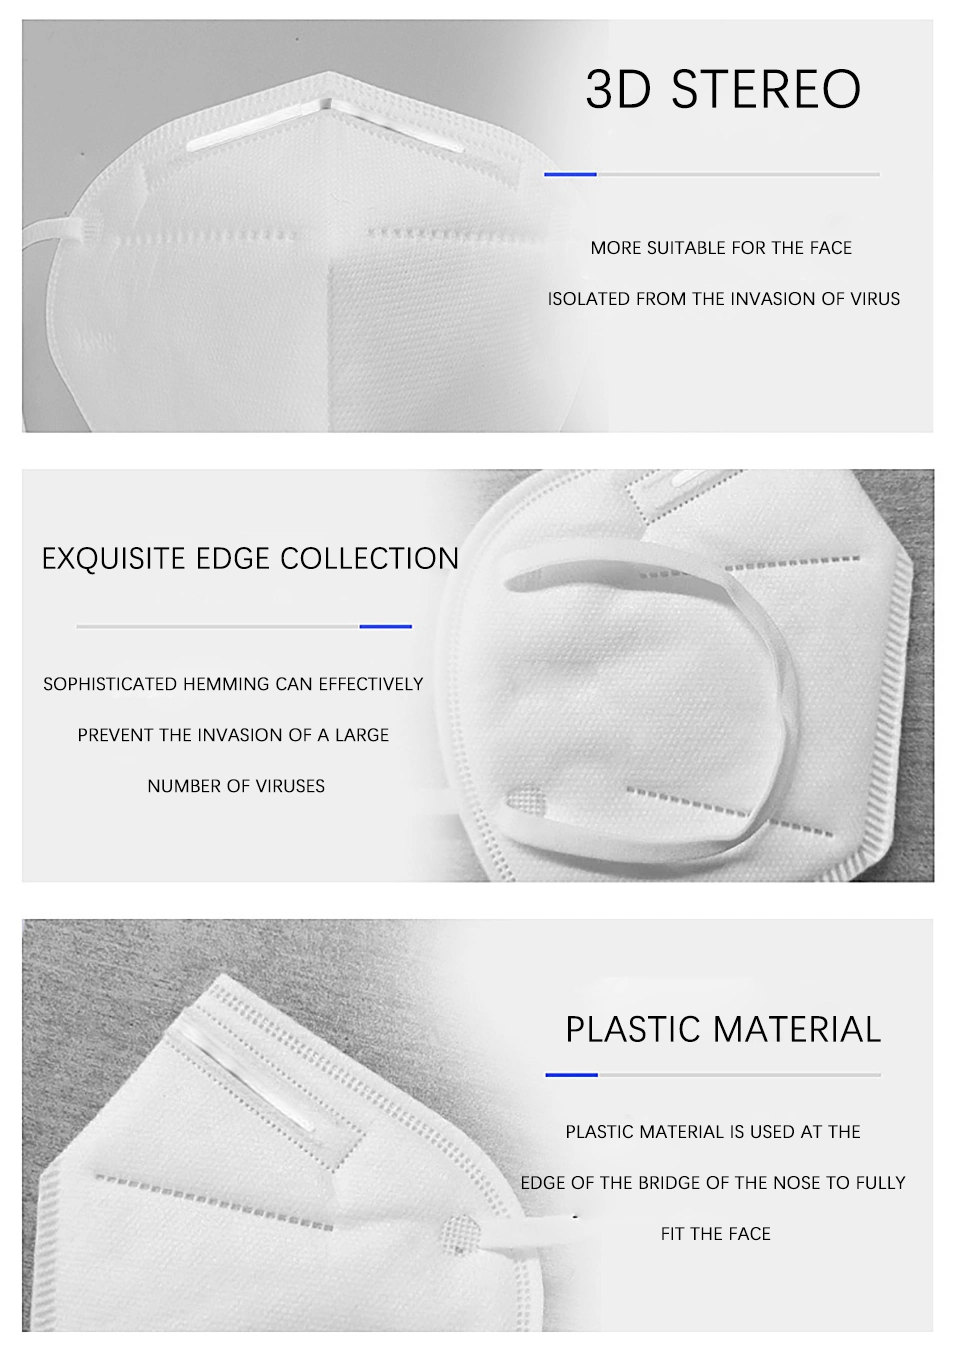 Reusable Kn95 Mask Valved Face Mask Protection Face Mask 95% Filtration Protective Mask Face Mask Ffp3 Fpp3 Fpp2